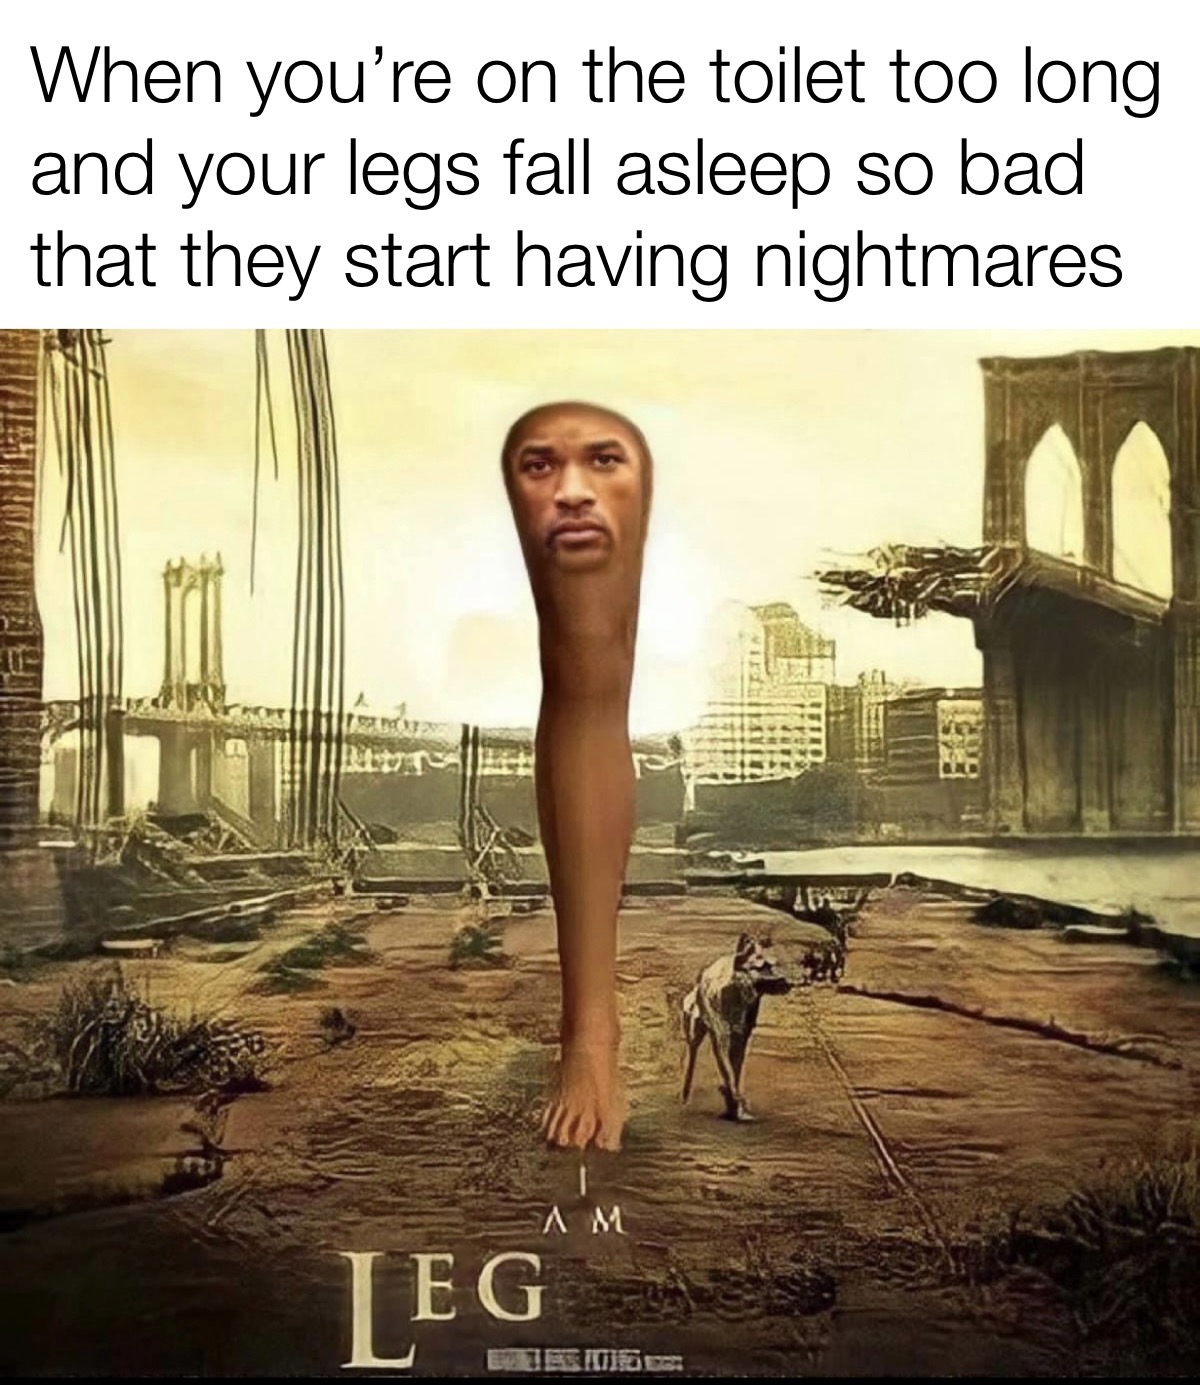 funny memes - dank memes - will smith i am leg meme - When you're on the toilet too long and your legs fall asleep so bad that they start having nightmares I Sad Ne Pred Am Leg